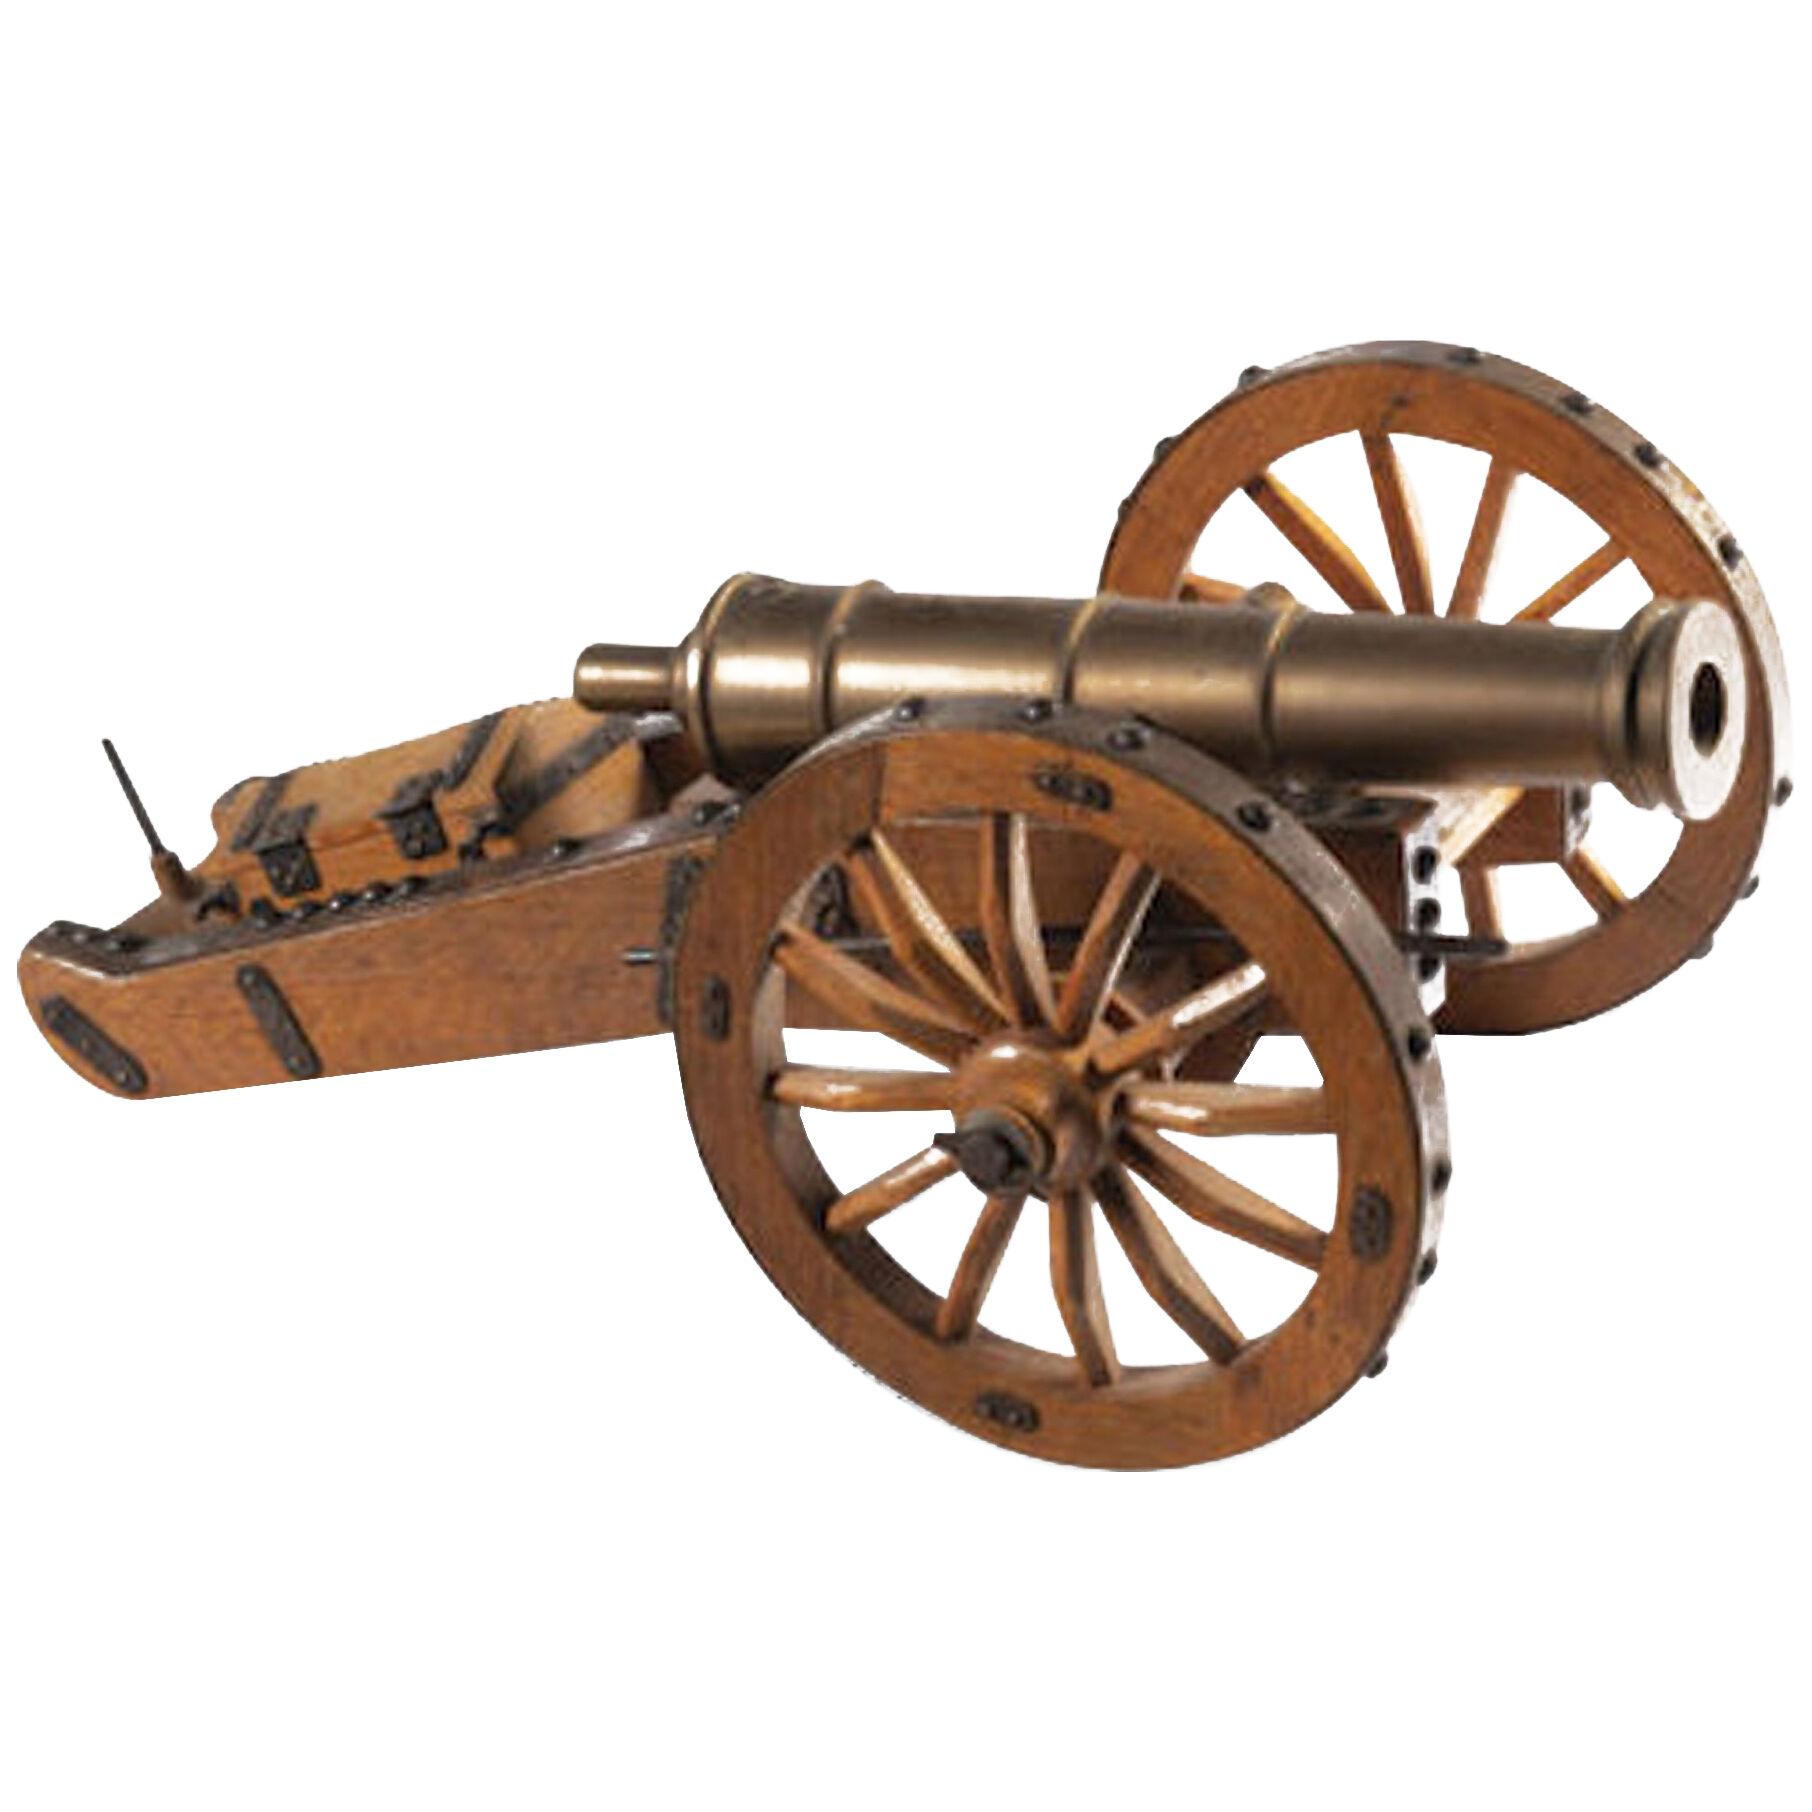 A 19th Century Scale Model of an Artillery Cannon